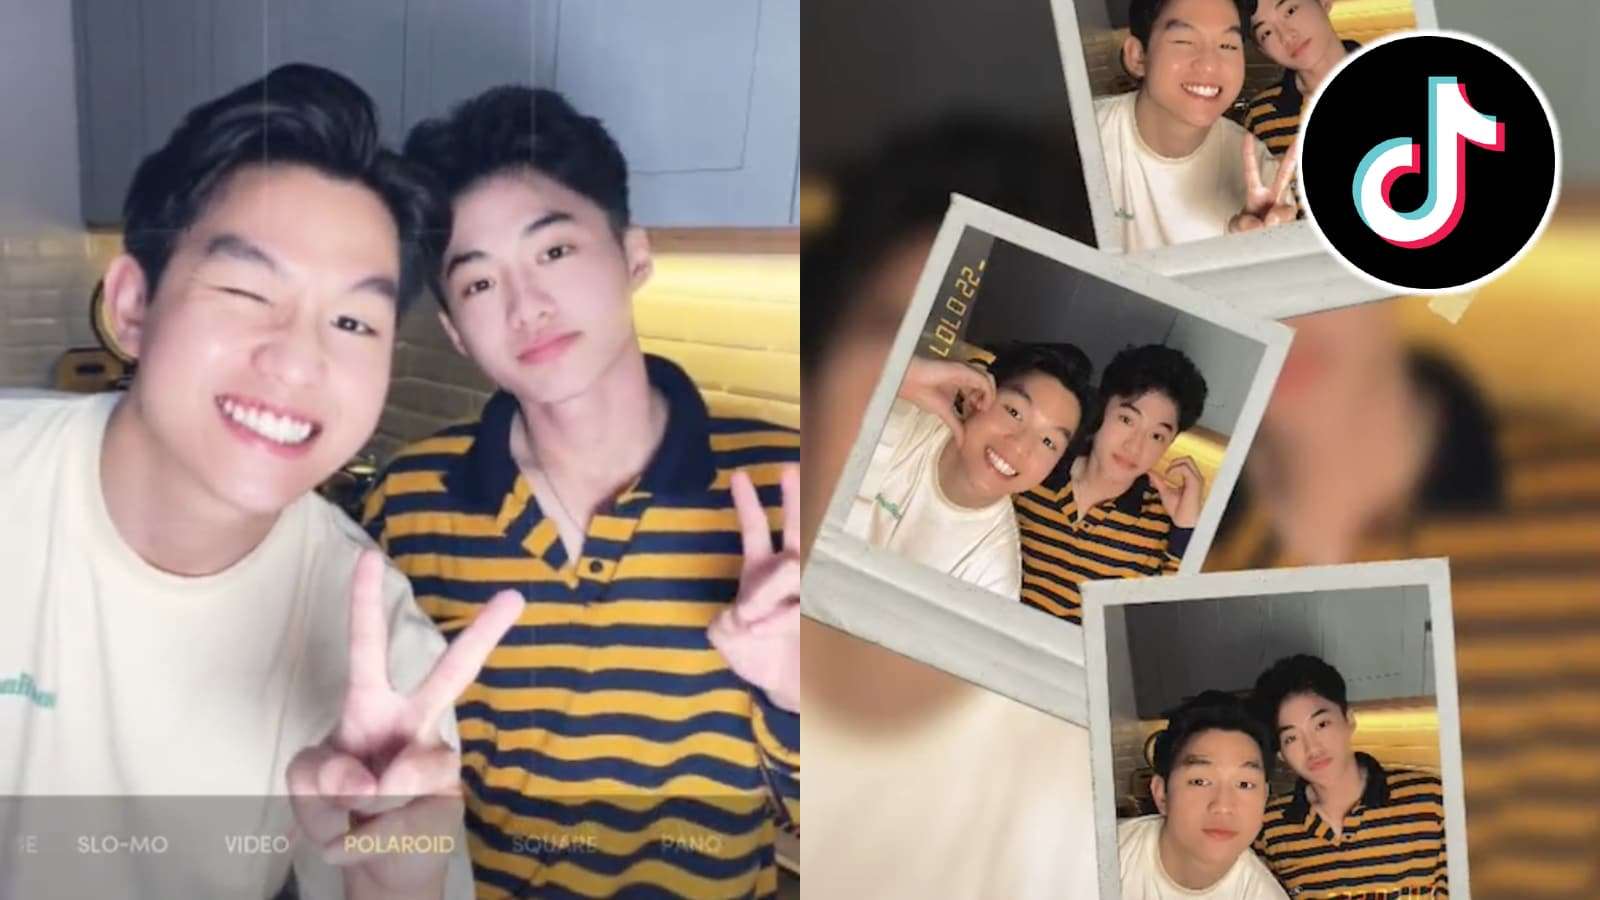 Users try out the polaroid filter on TikTok